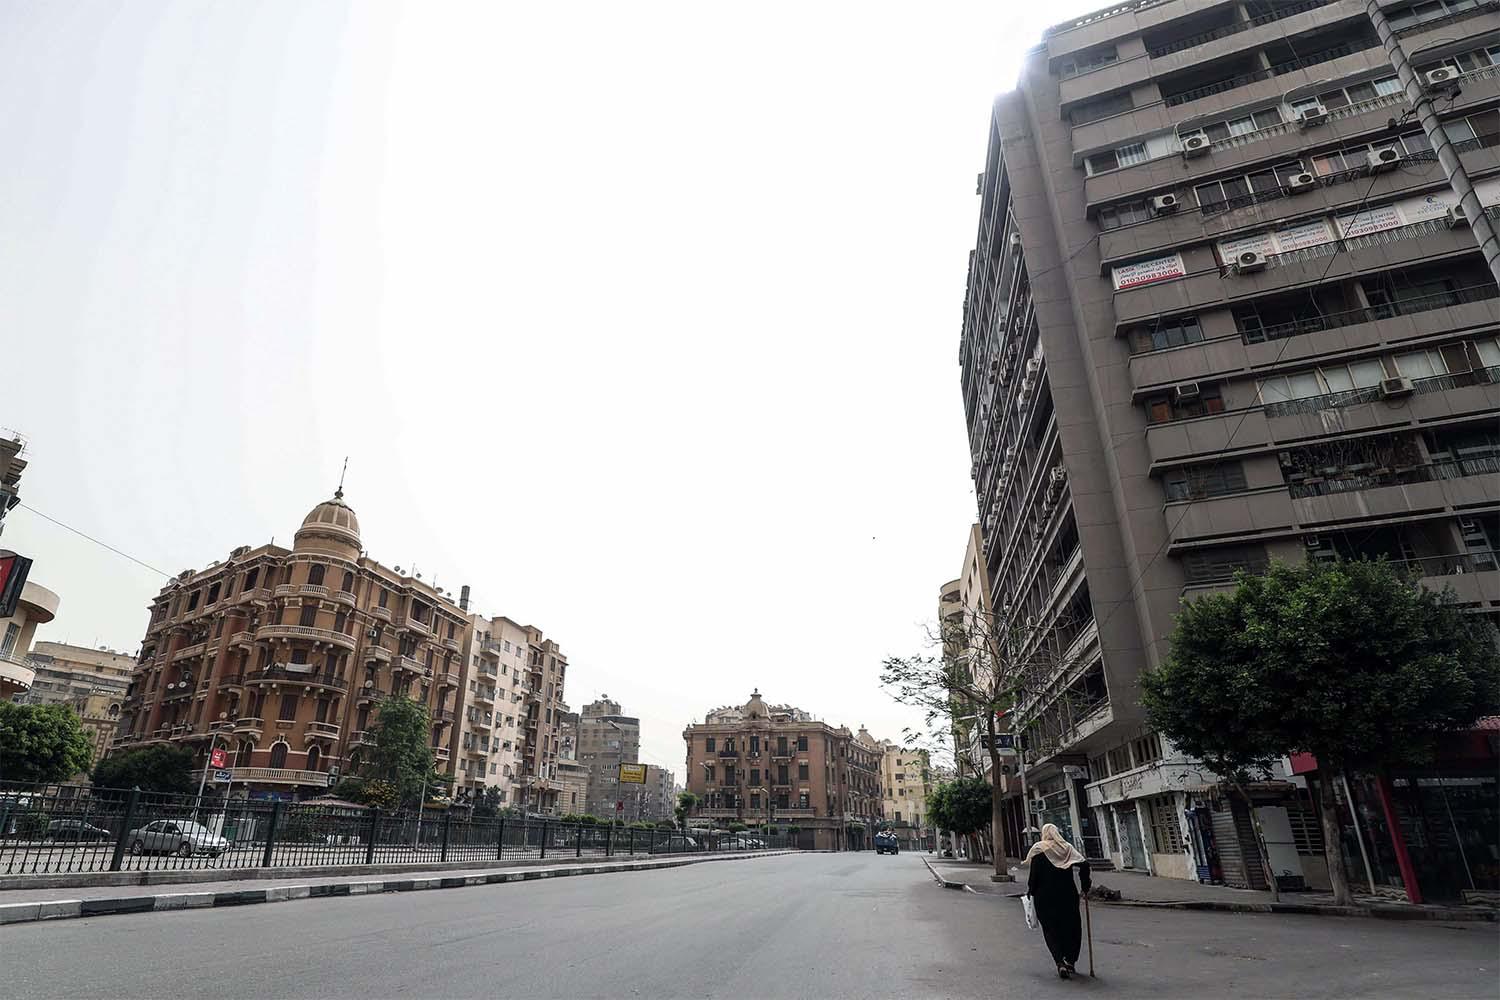 Khedival Cairo is rich in buildings that are government owned